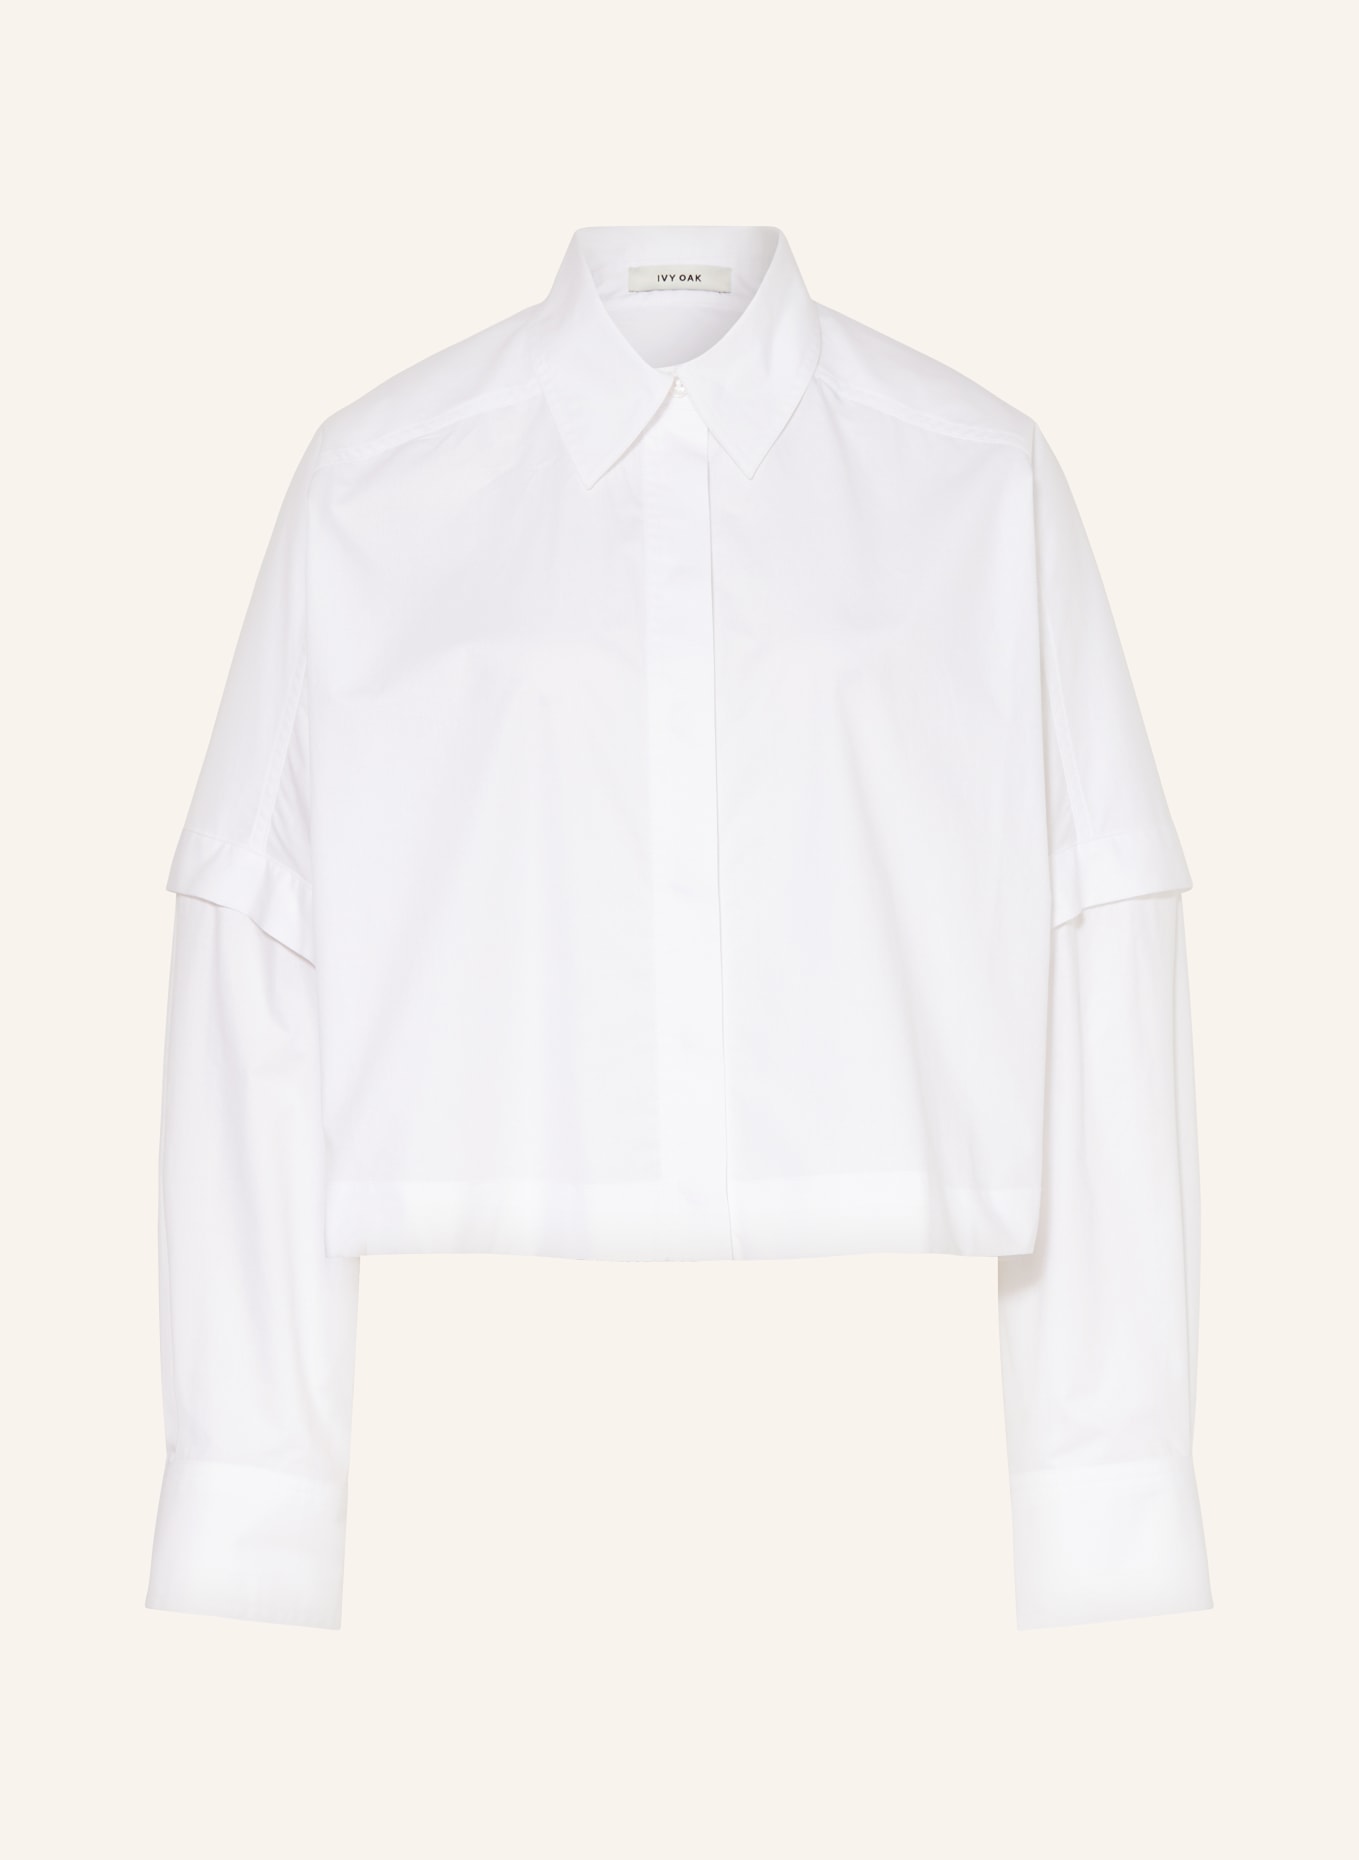 IVY OAK Cropped shirt blouse ELVIRA with detachable sleeves, Color: WHITE (Image 1)